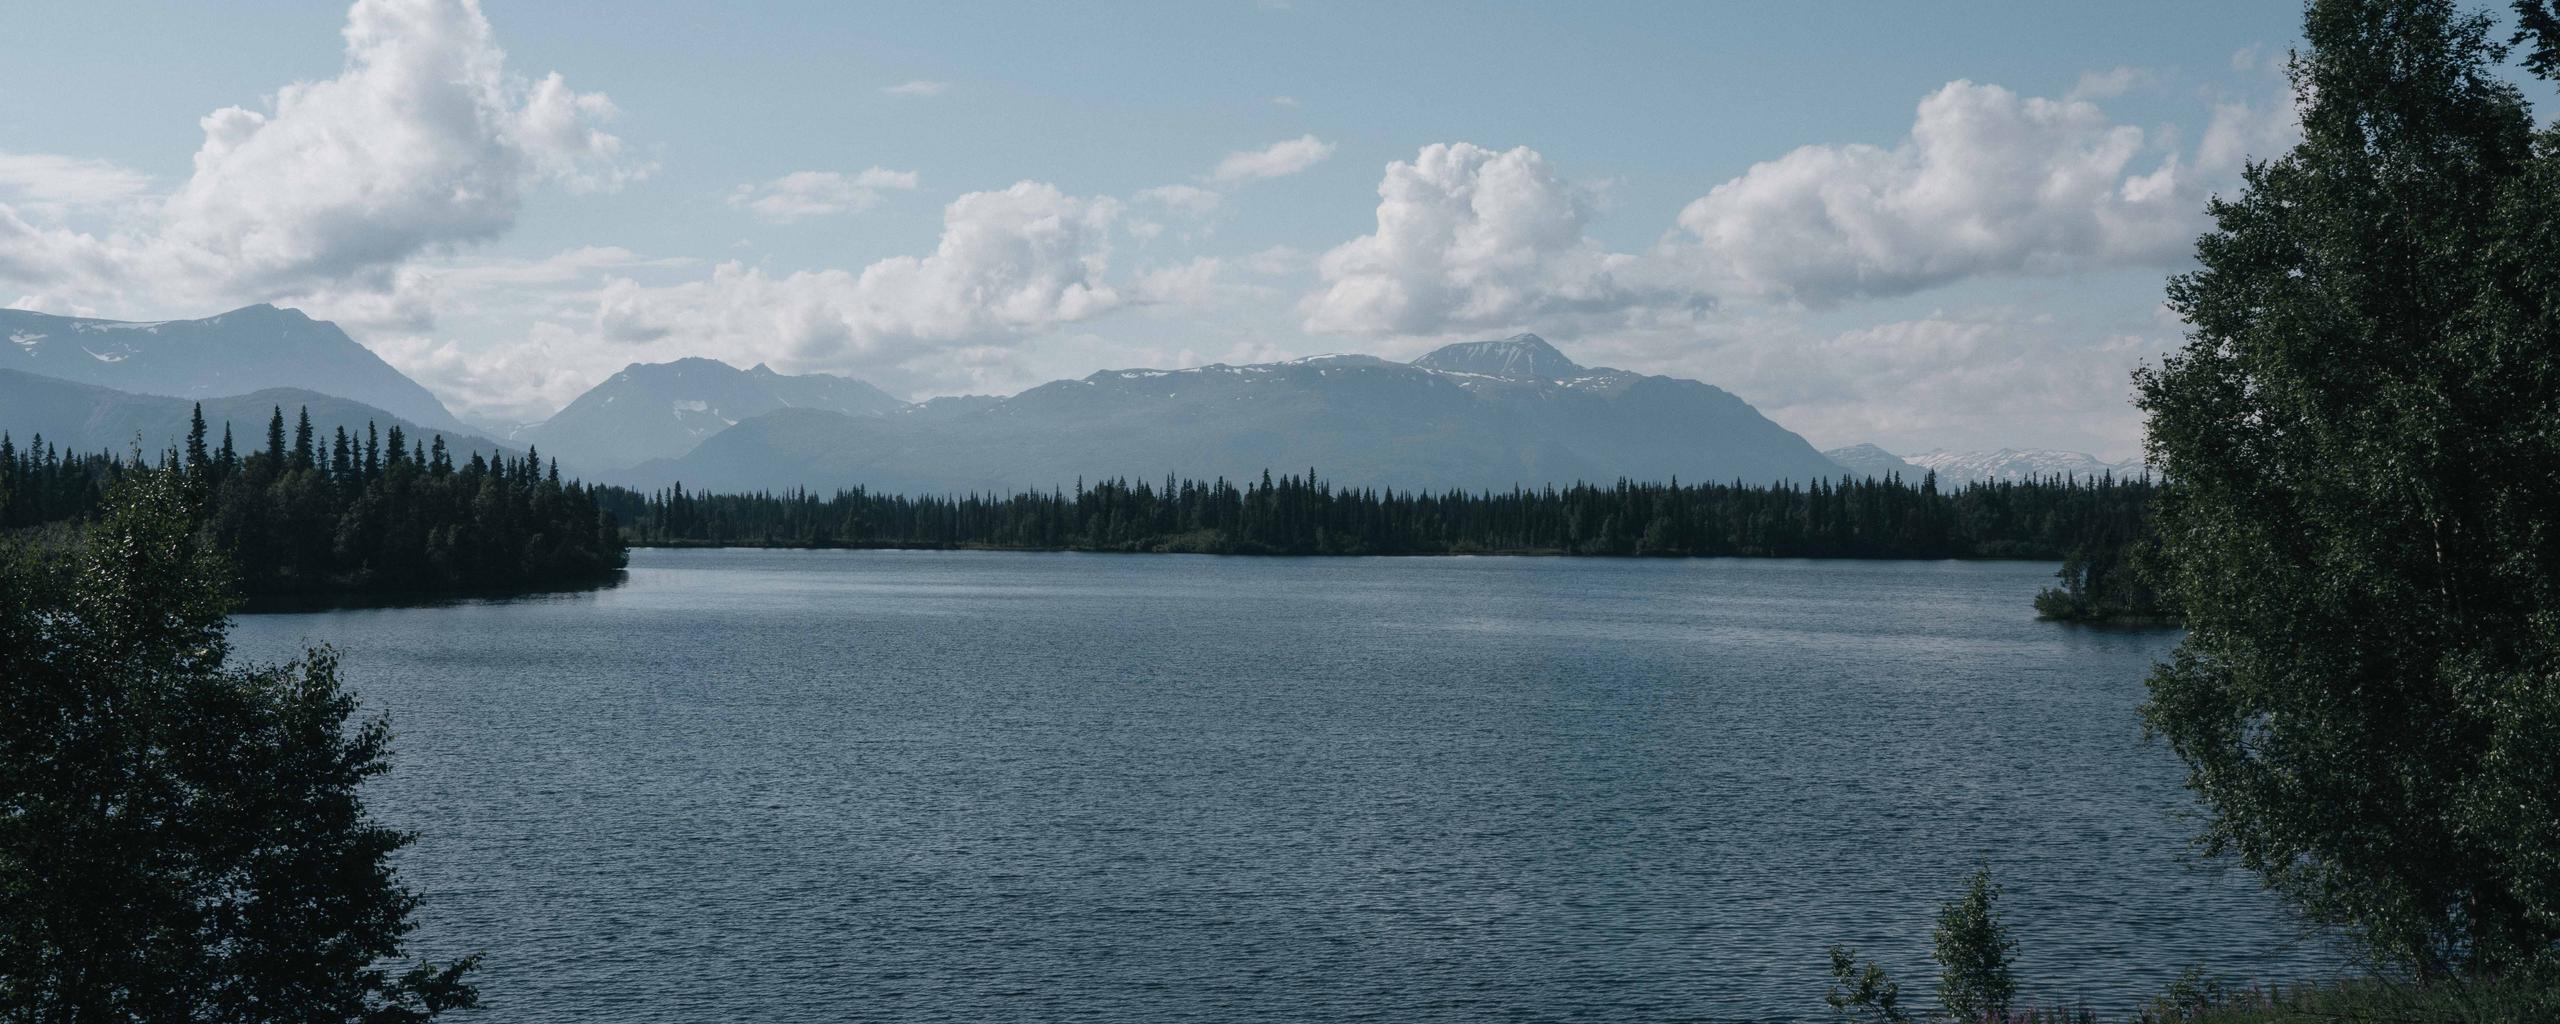 Scenic lake view in Alaska with mountains in the background